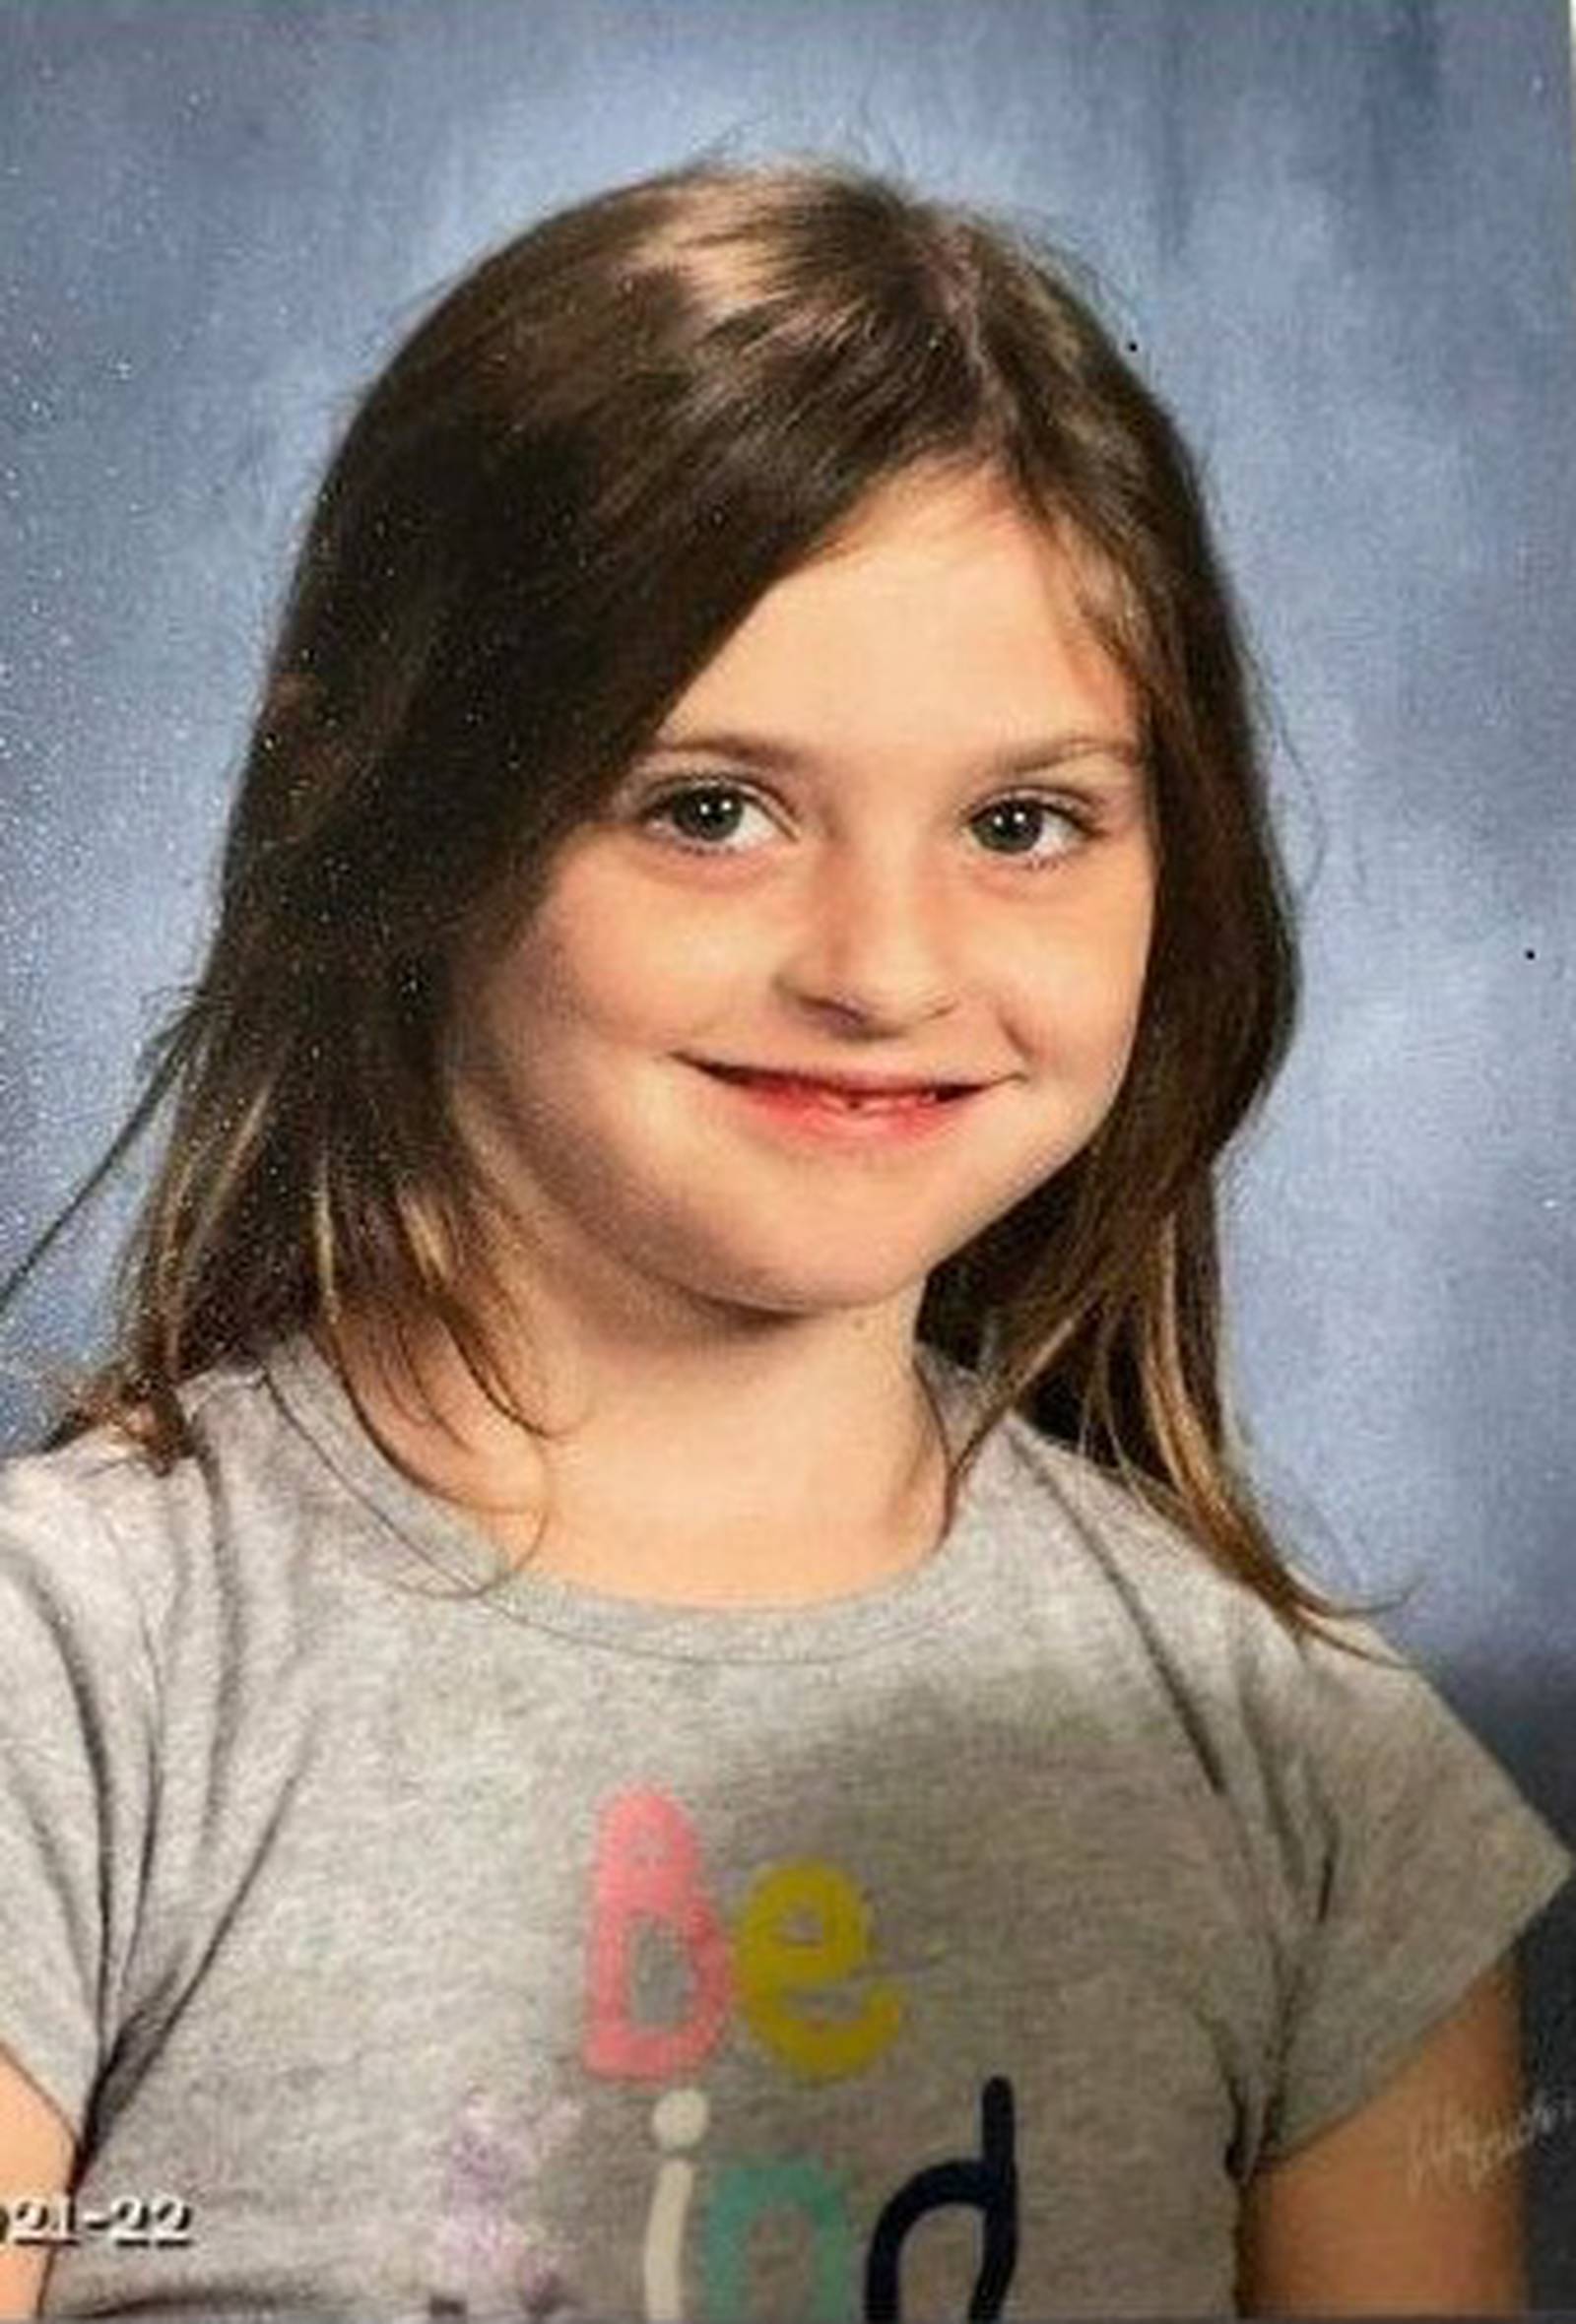 Update Amber Alert For 5 Year Old Girl Missing From Stark County Cancelled Whio Tv 7 And Whio 8368